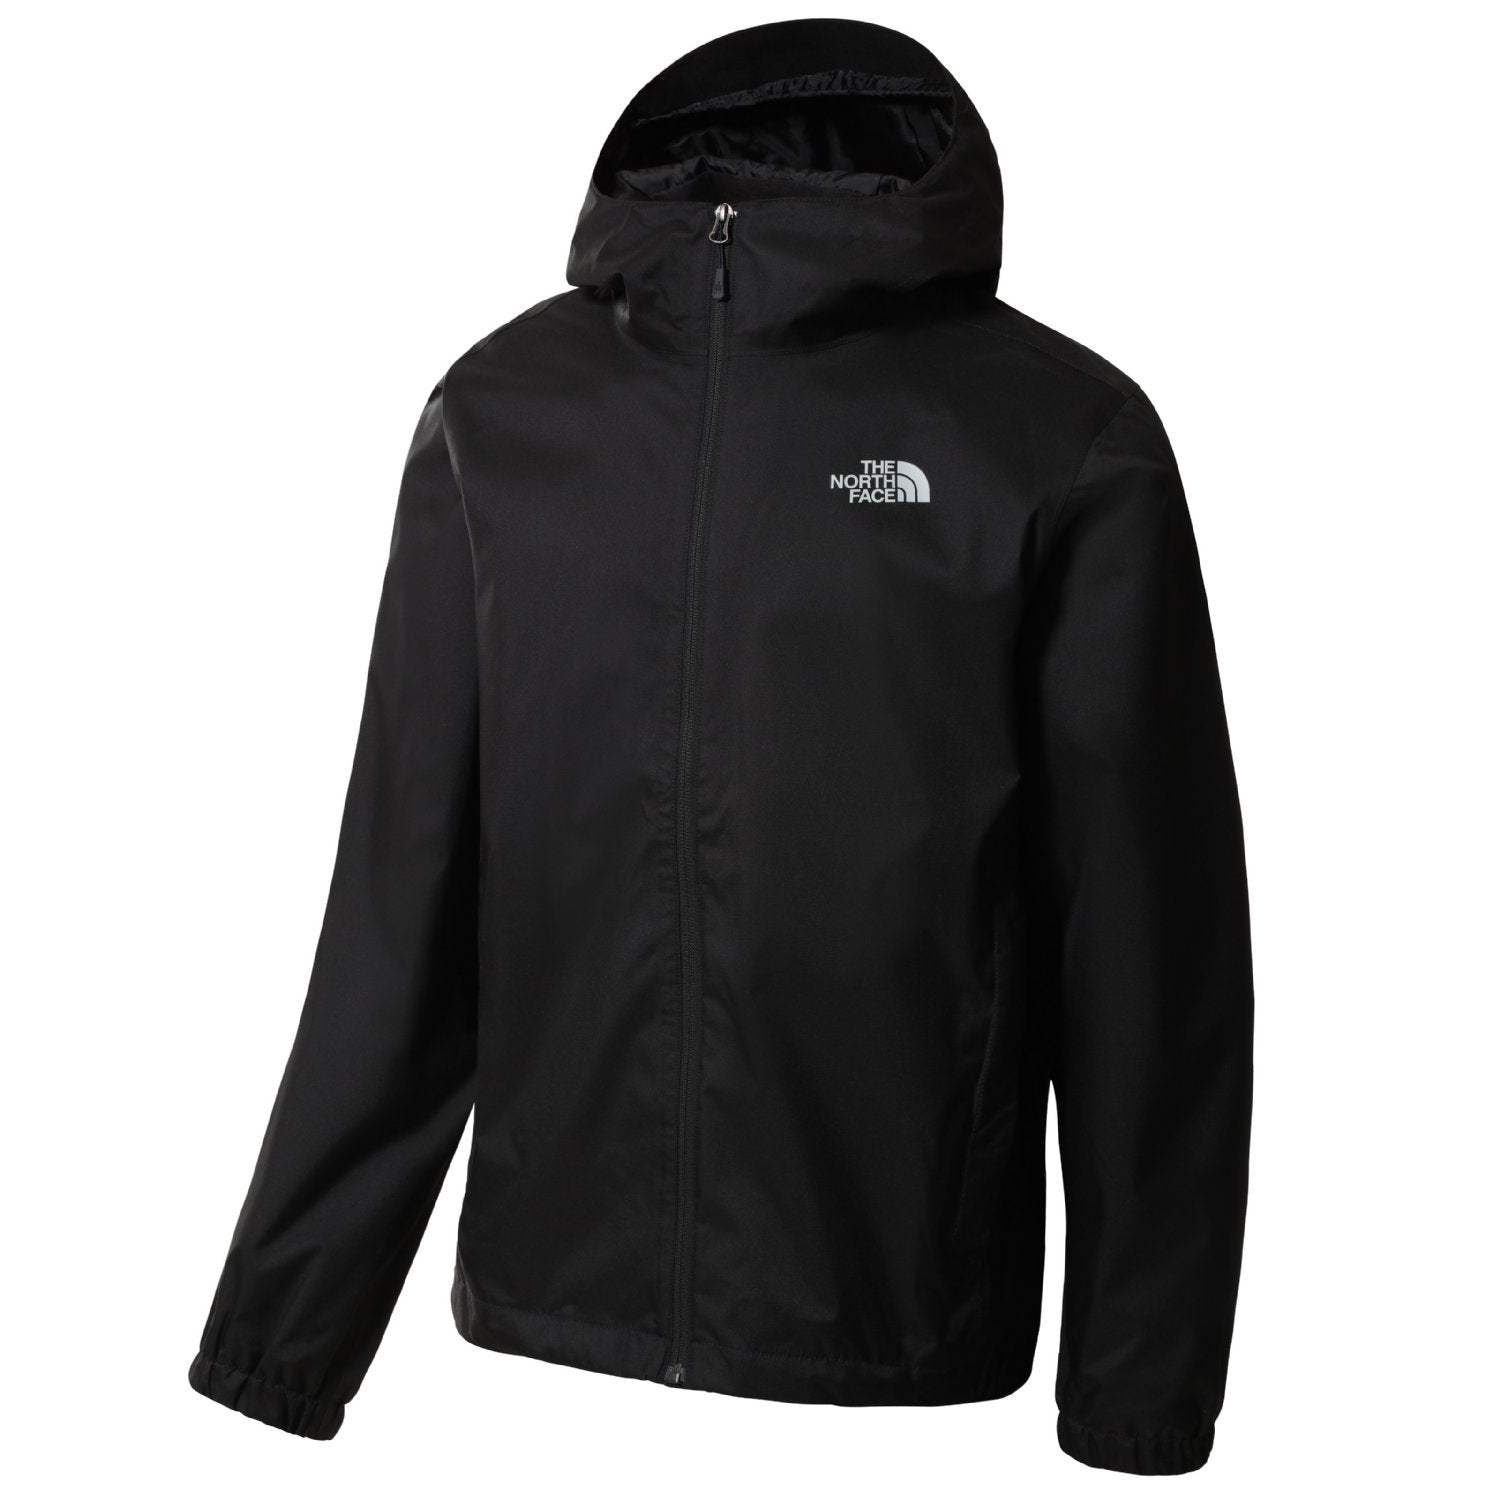 Men's Quest Jacket by The North Face - The Luxury Promotional Gifts Company Limited